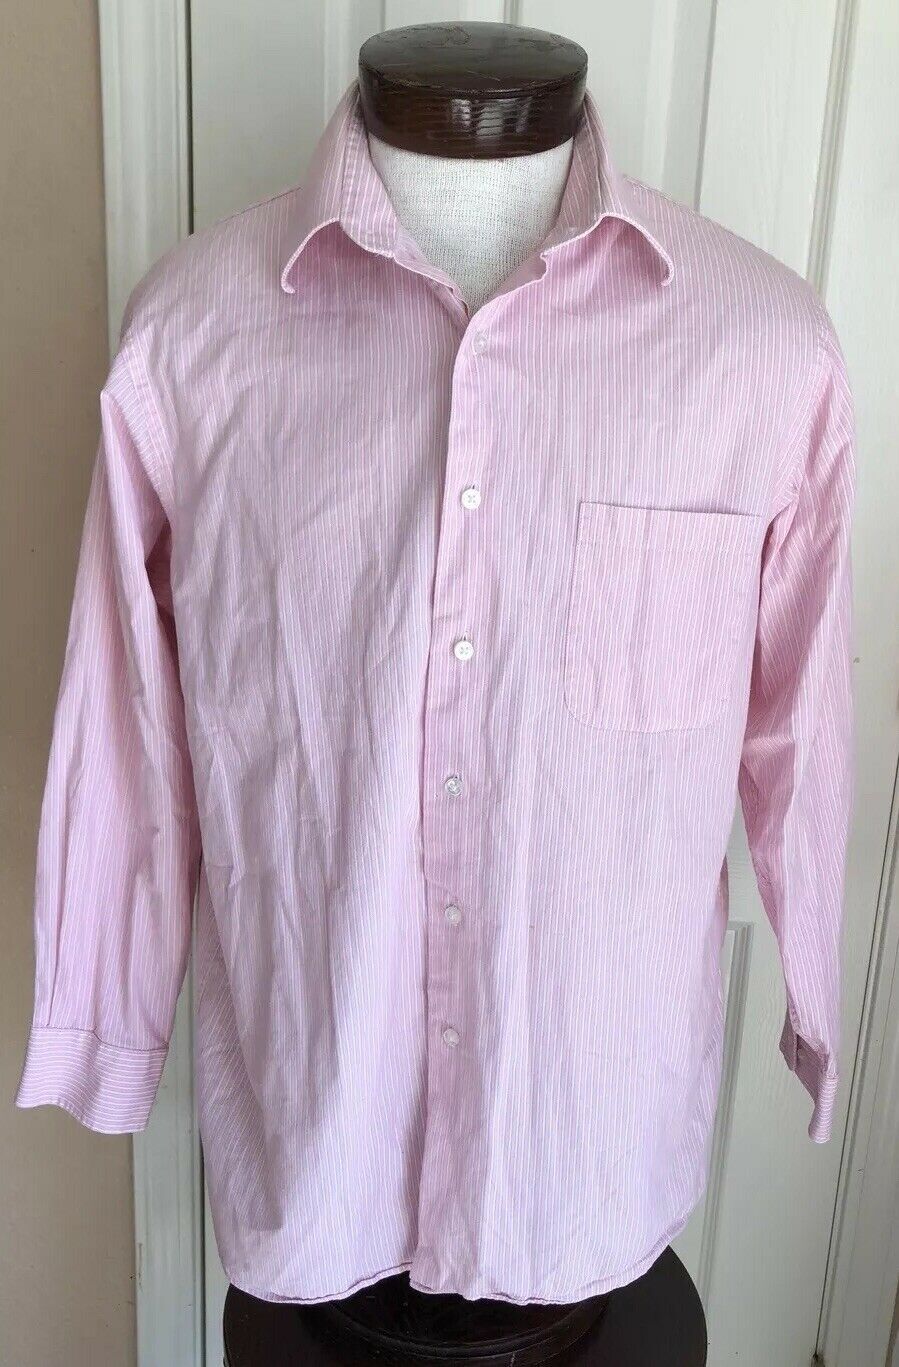 Primary image for Calvin Klein Pink & White Pinstriped Relaxed Fit Button Front Shirt Mens L 32/33